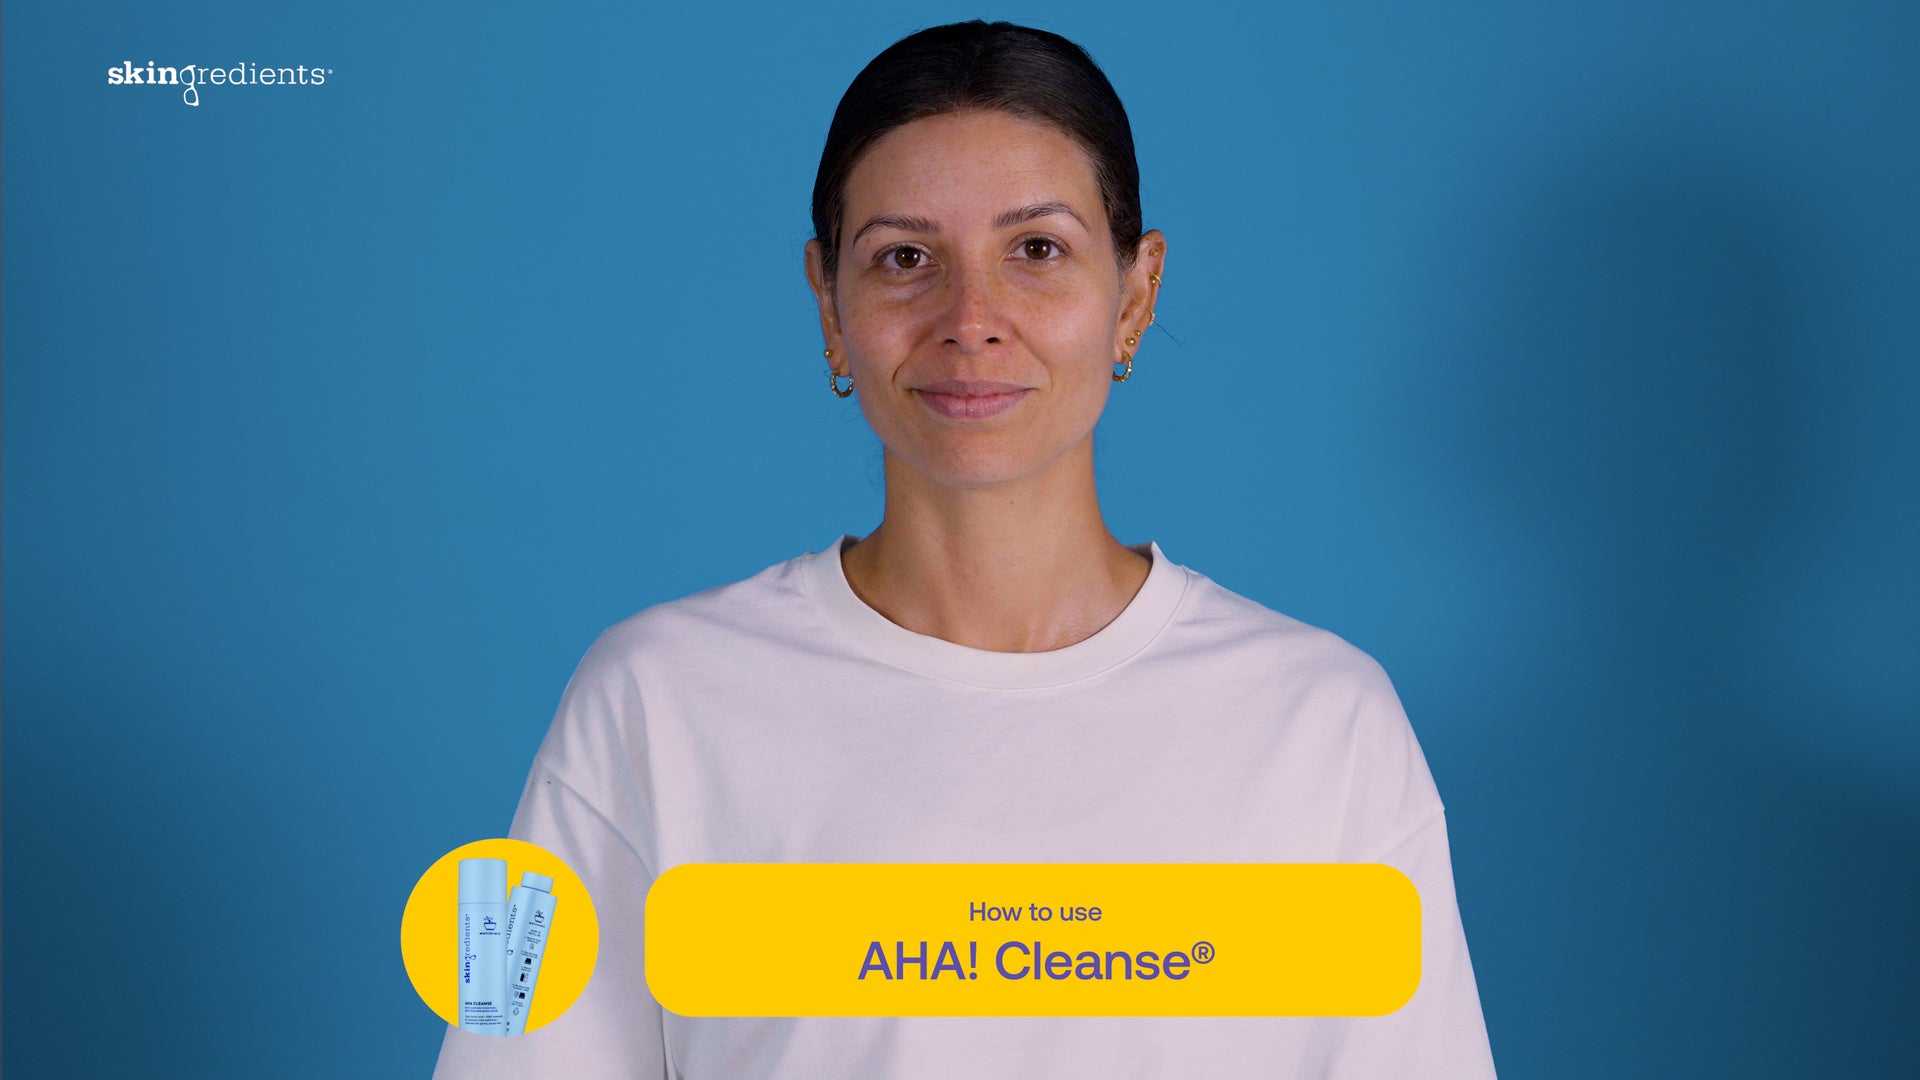 Load video: &lt;p class=&quot;p1&quot; data-mce-fragment=&quot;1&quot;&gt;&lt;span&gt;Skingredients® NEW AHA! Cleanse® (100ml) is an active cleanser and micro-mask that contains 8% lactic acid and 1% PHA, which work in harmony to brighten, exfoliate, hydrate and plump the skin. Part of the Skingredients Match + Mix range, use AHA Cleanse 2 to 3 times a week, alternating with PreProbiotic Cleanse, for luminous, glowing skin. Lactic acid is an alpha-hydroxy acid that exfoliates the skin by gently loosening and sweeping away dead skin cells from the skin’s surface. &lt;/span&gt;&lt;/p&gt;
&lt;p class=&quot;p1&quot; data-mce-fragment=&quot;1&quot;&gt;&lt;span&gt;This cleanser promotes smooth, even skin and increases the rate of skin cell turnover. Exfoliating yet importantly also hydrating, our nerdie panellists have been loving the instant glowing results whilst not over-exfoliating the skin. Found your favourite new way to GLOW? Make sure you keep your primary pack and switch to buying a &lt;/span&gt;&lt;span&gt;refill tube&lt;/span&gt;&lt;span&gt; next time. This Primary Pack tube is your tube-for-life that’s made from resilient, ultra-durable materials.&lt;/span&gt;&lt;/p&gt;